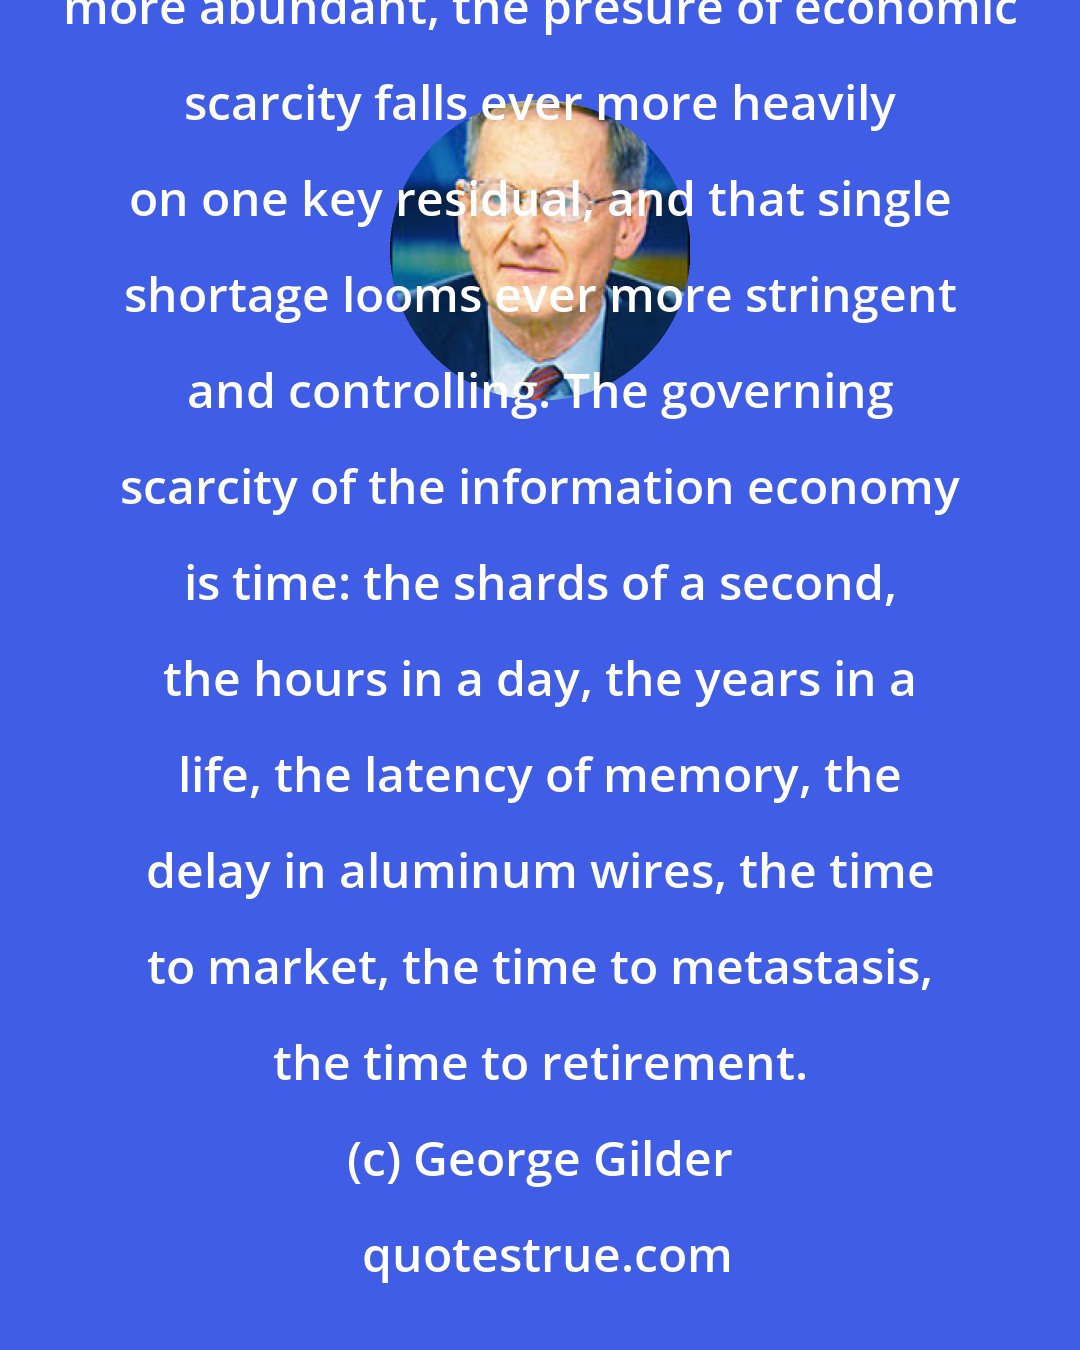 George Gilder: The information glut has become a ruling cliche. As all resources - from energy to information - become more abundant, the presure of economic scarcity falls ever more heavily on one key residual, and that single shortage looms ever more stringent and controlling. The governing scarcity of the information economy is time: the shards of a second, the hours in a day, the years in a life, the latency of memory, the delay in aluminum wires, the time to market, the time to metastasis, the time to retirement.